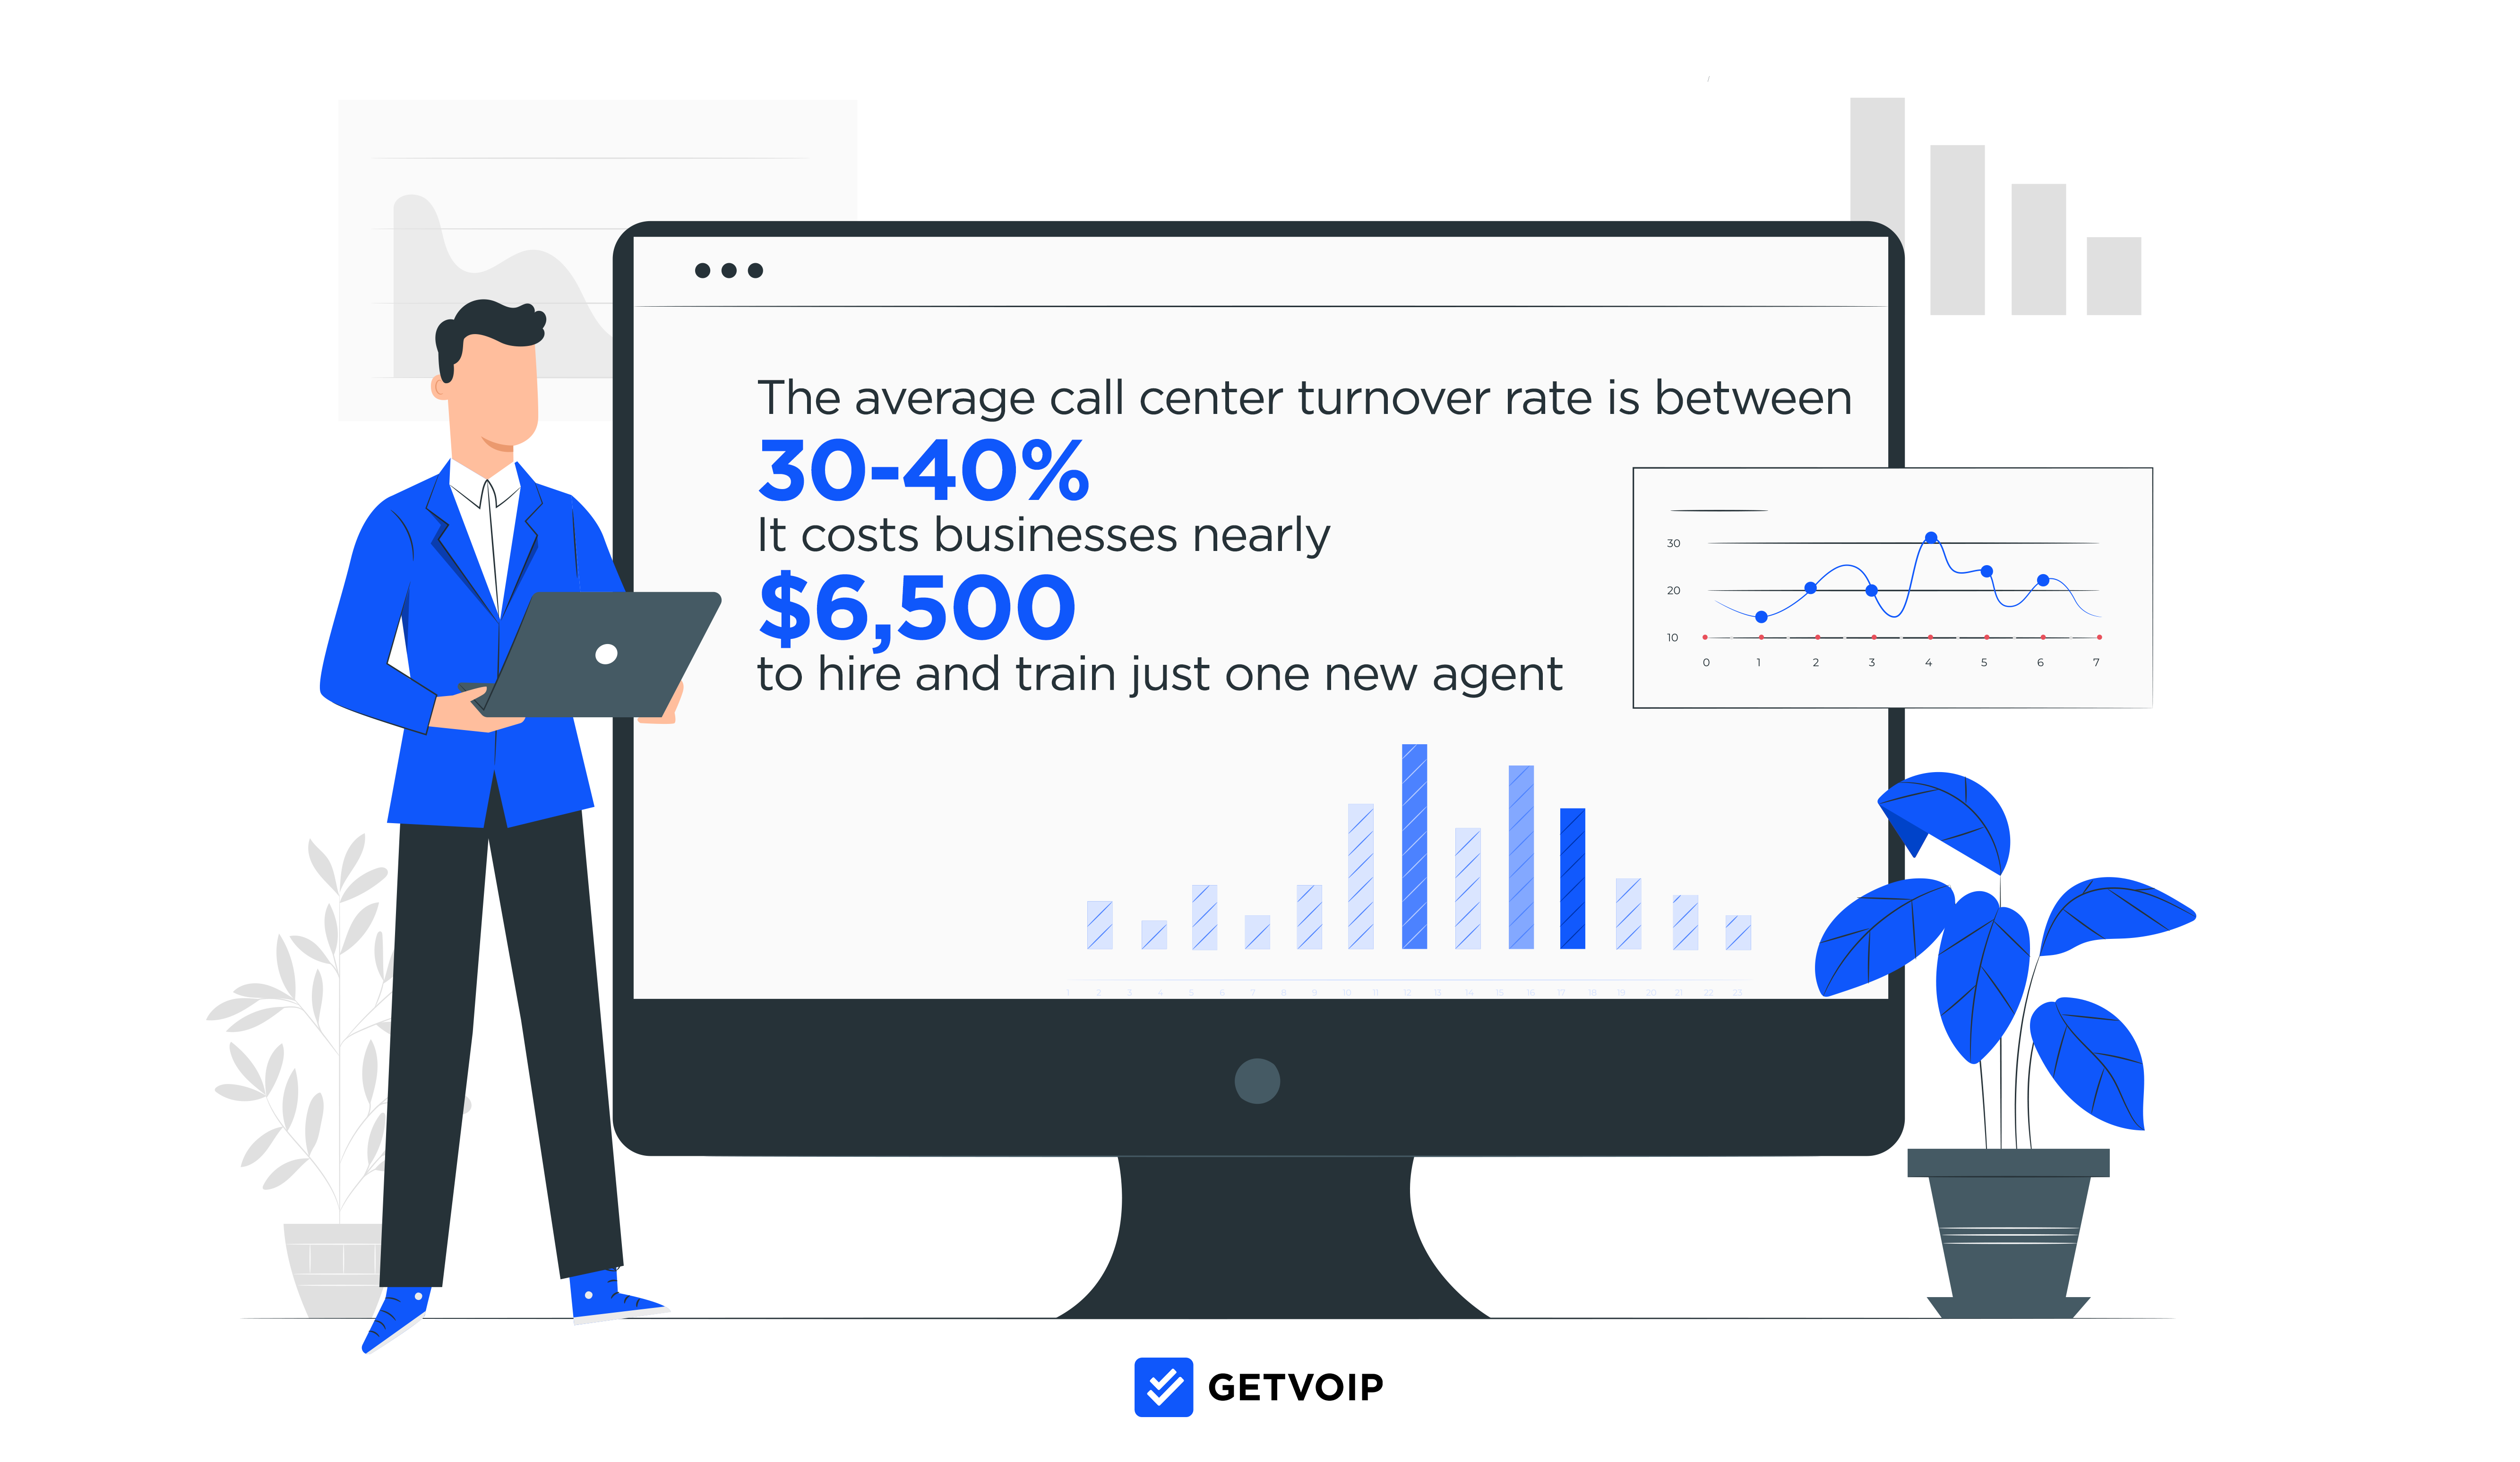 Call center turnover rate